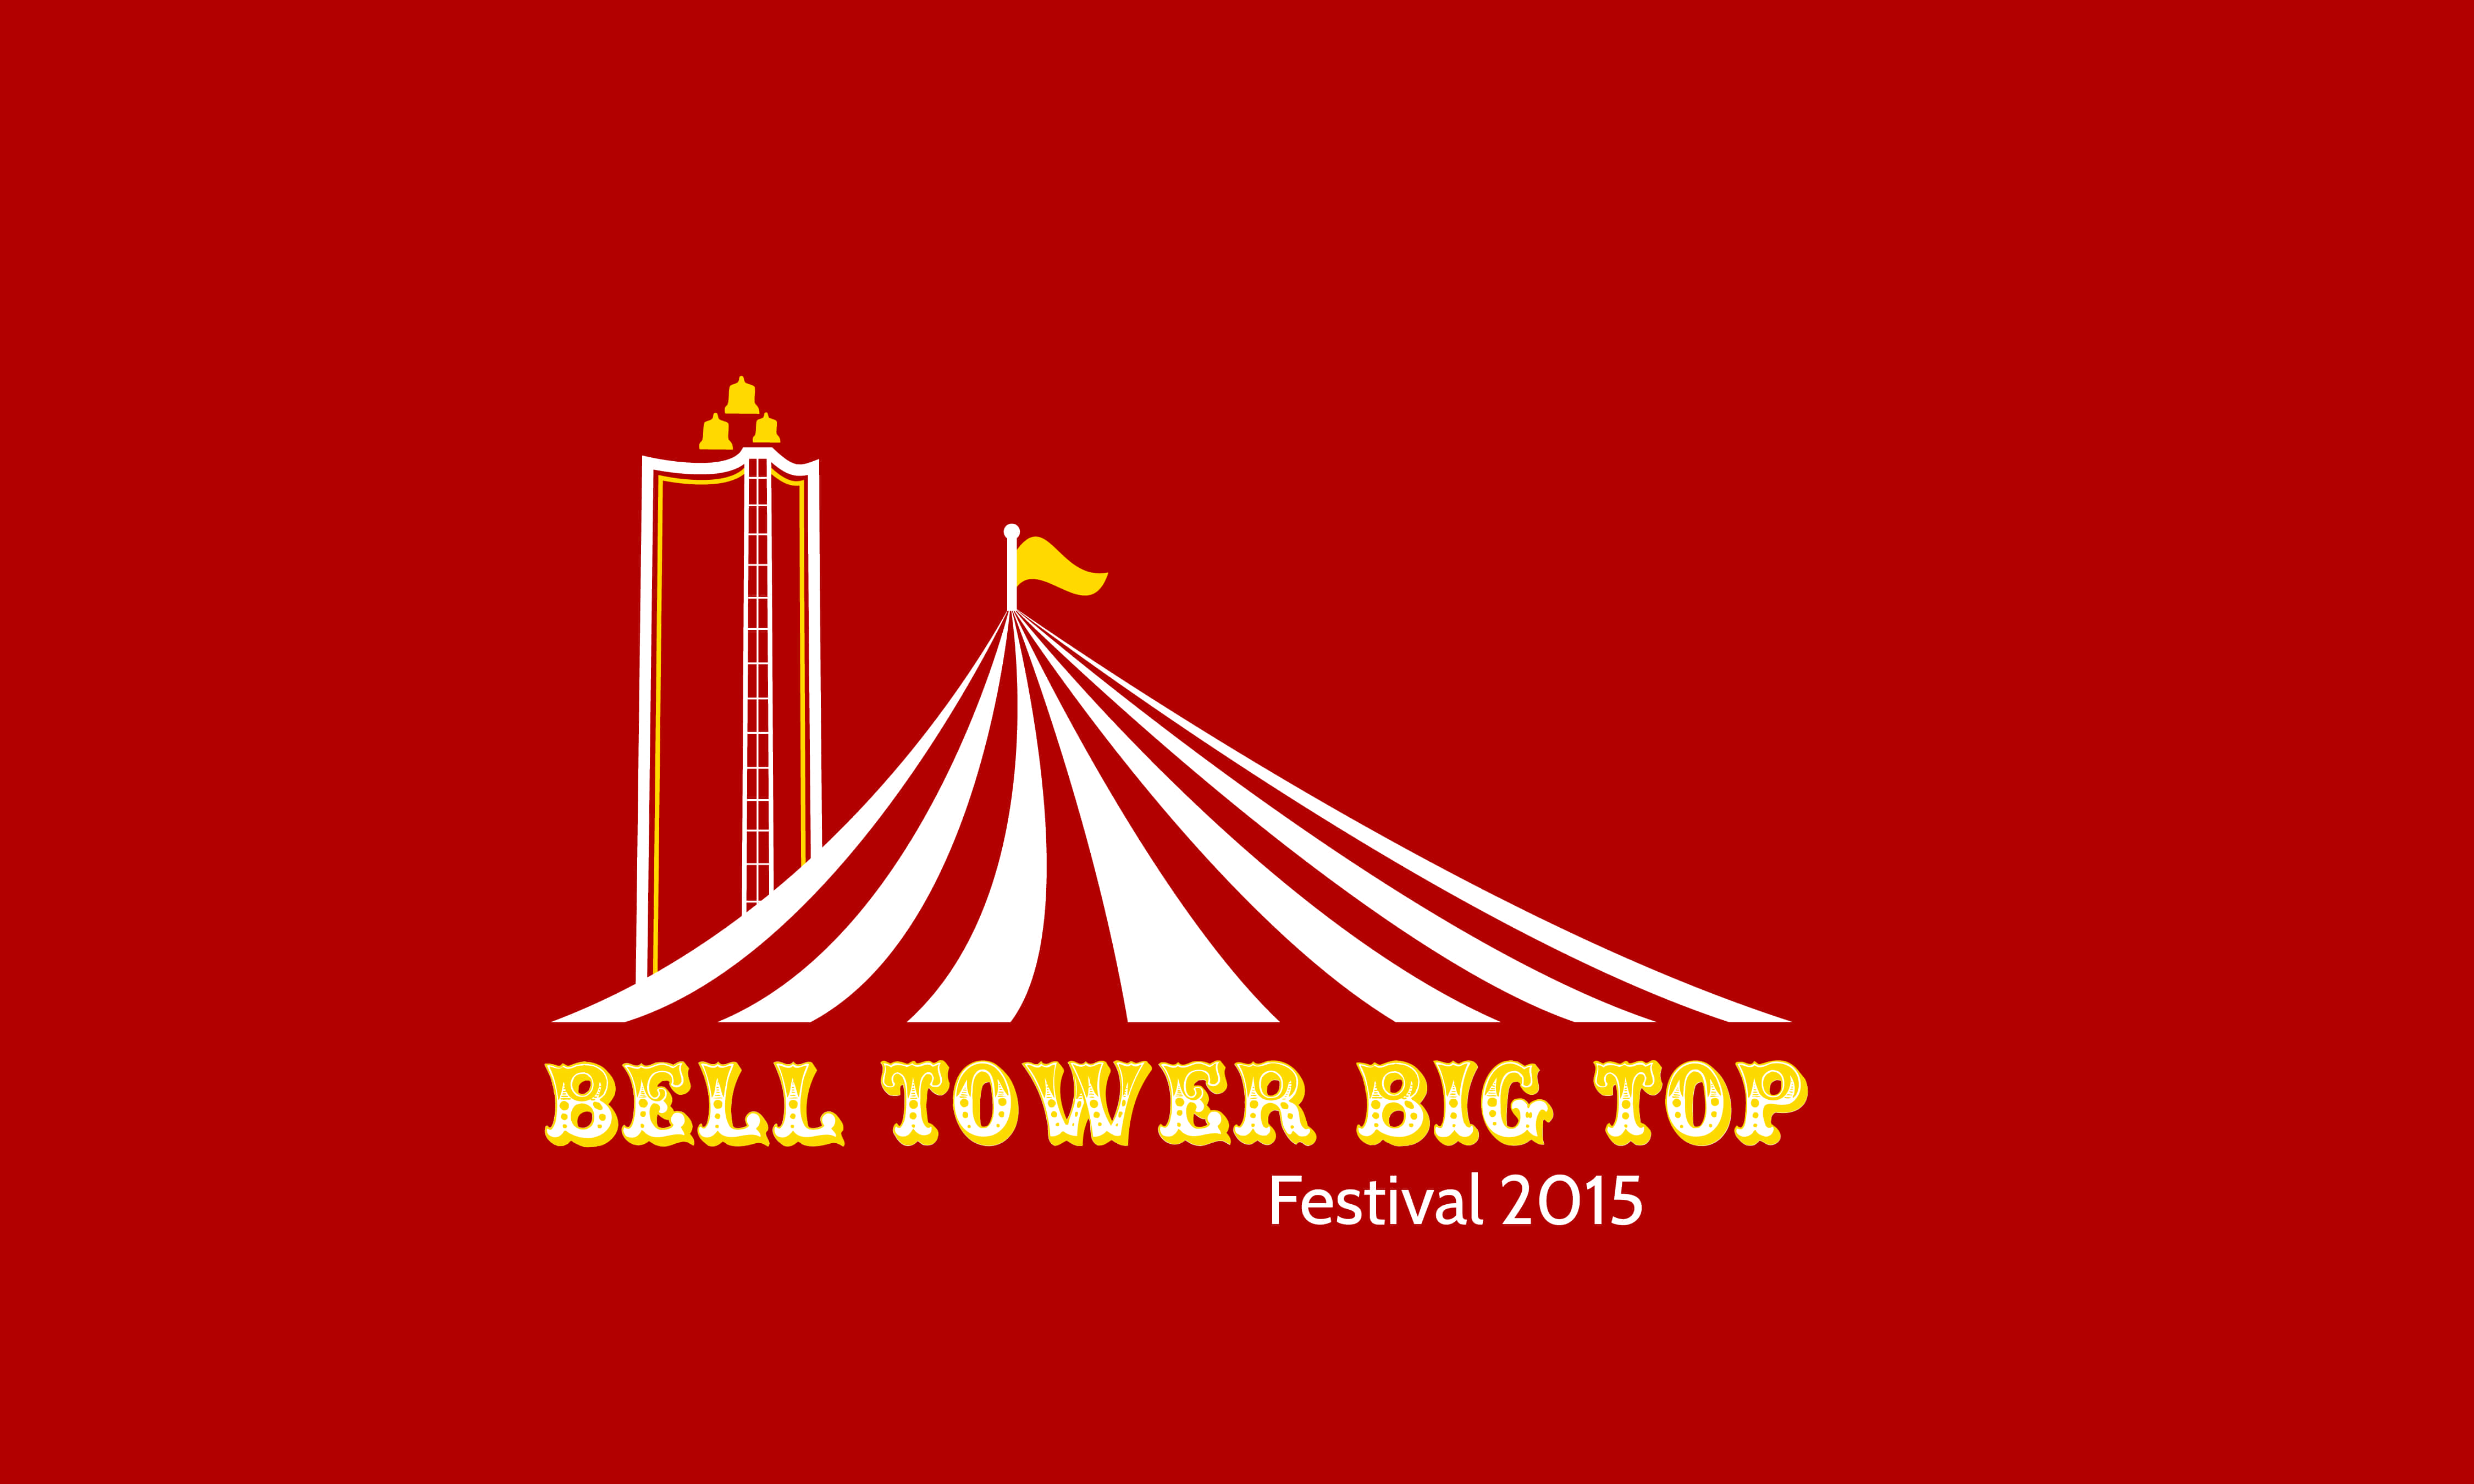 Bell Tower Festival Ride Tickets Now Available | Raccoon Valley Radio